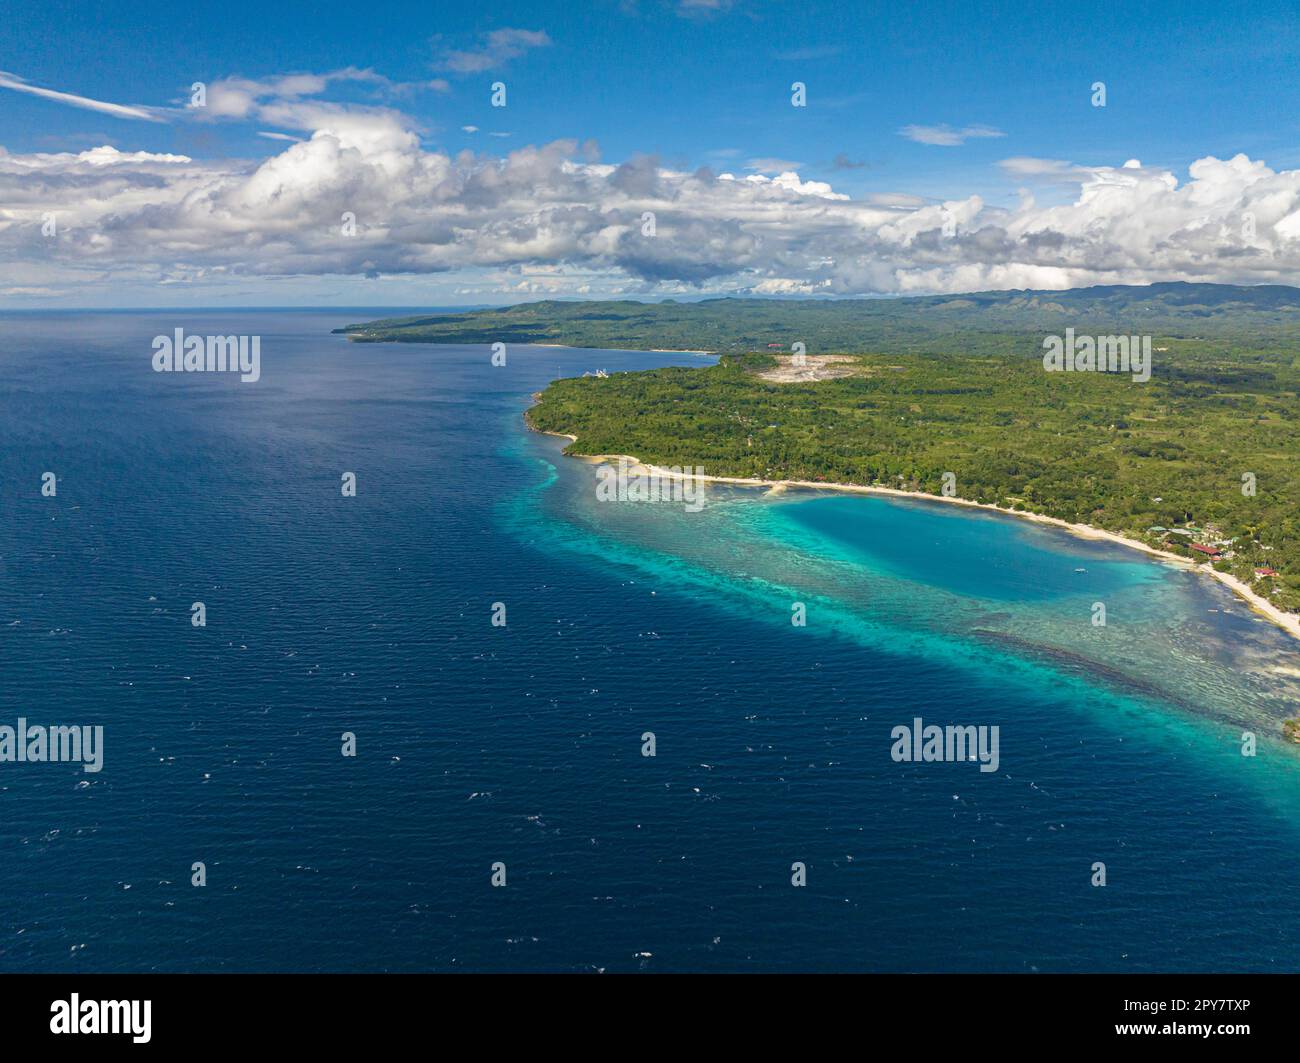 A body of land surrounded by Beautiful waves in outstanding blue ocean with a long white sandy beach. Siquijor, Philippines. Stock Photo